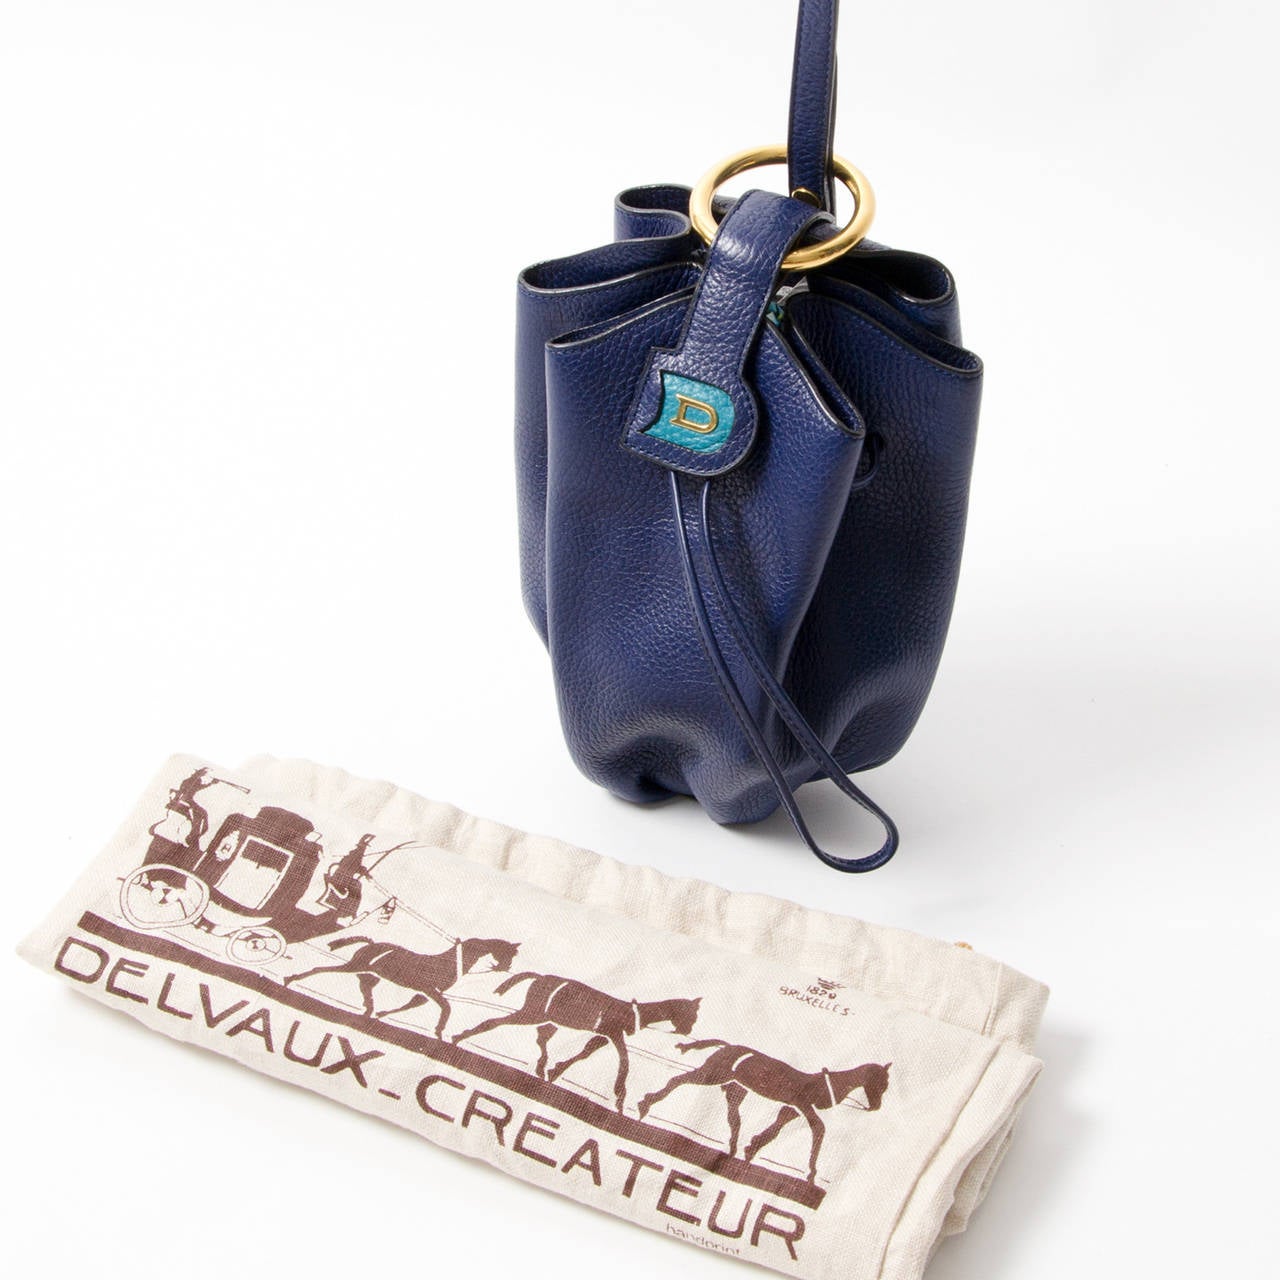 This authentic vintage bag by premium Belgian leather goods brand Delvaux features a lovely peacock blue hue and gold hardware. A long adjustable strap enables crossbody and over the shoulder wear. A magnetic front closure and all-around strap to